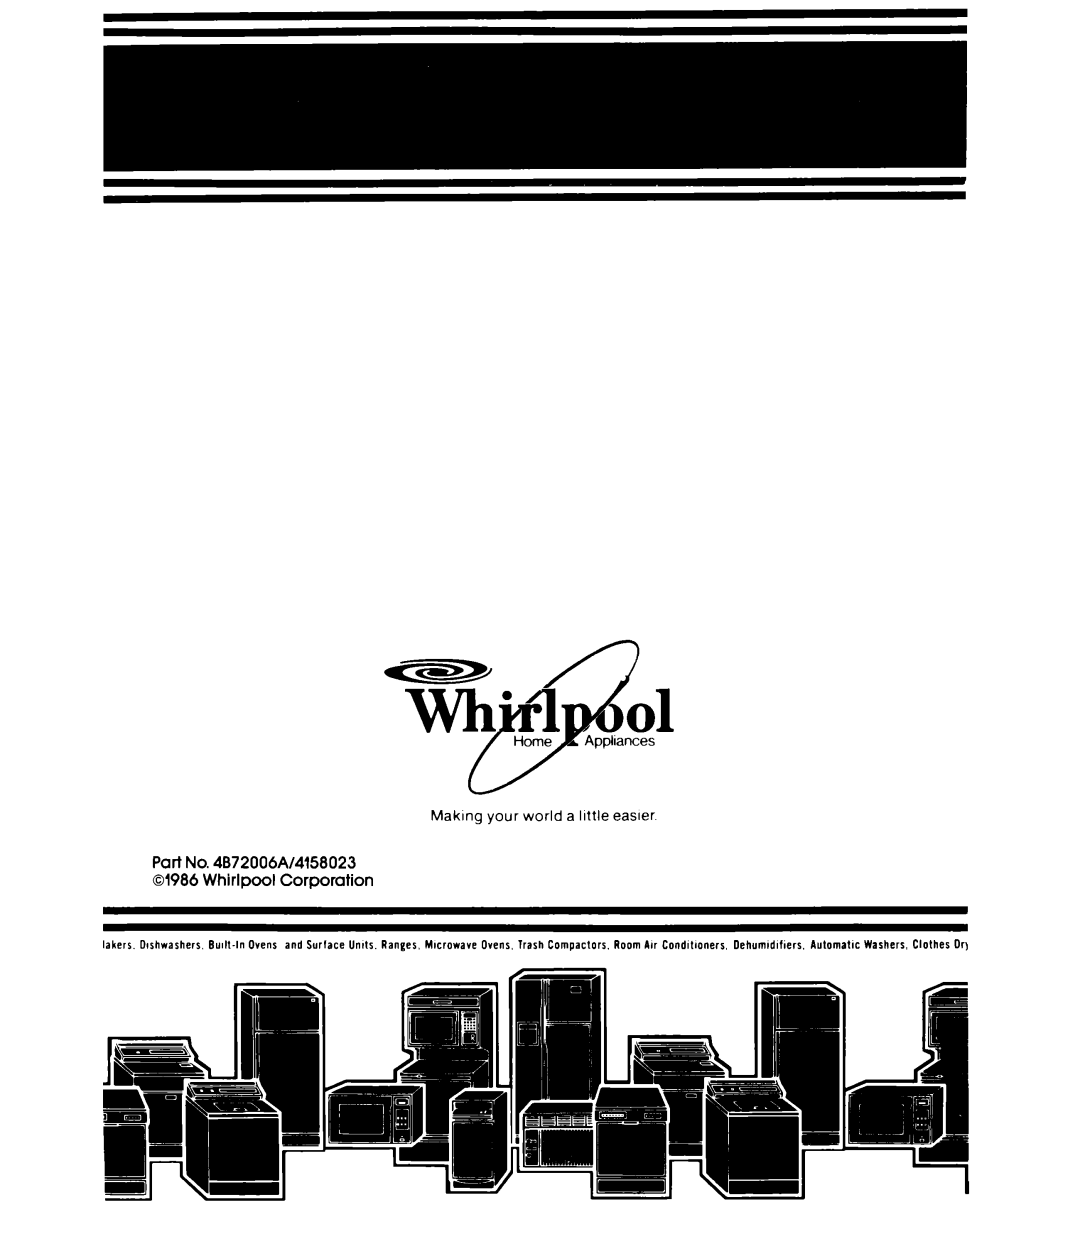 Whirlpool MW36OOXS manual Part No. 4B72006Al415B023, Whirlpool Corporation, Maklng your world a little easier 